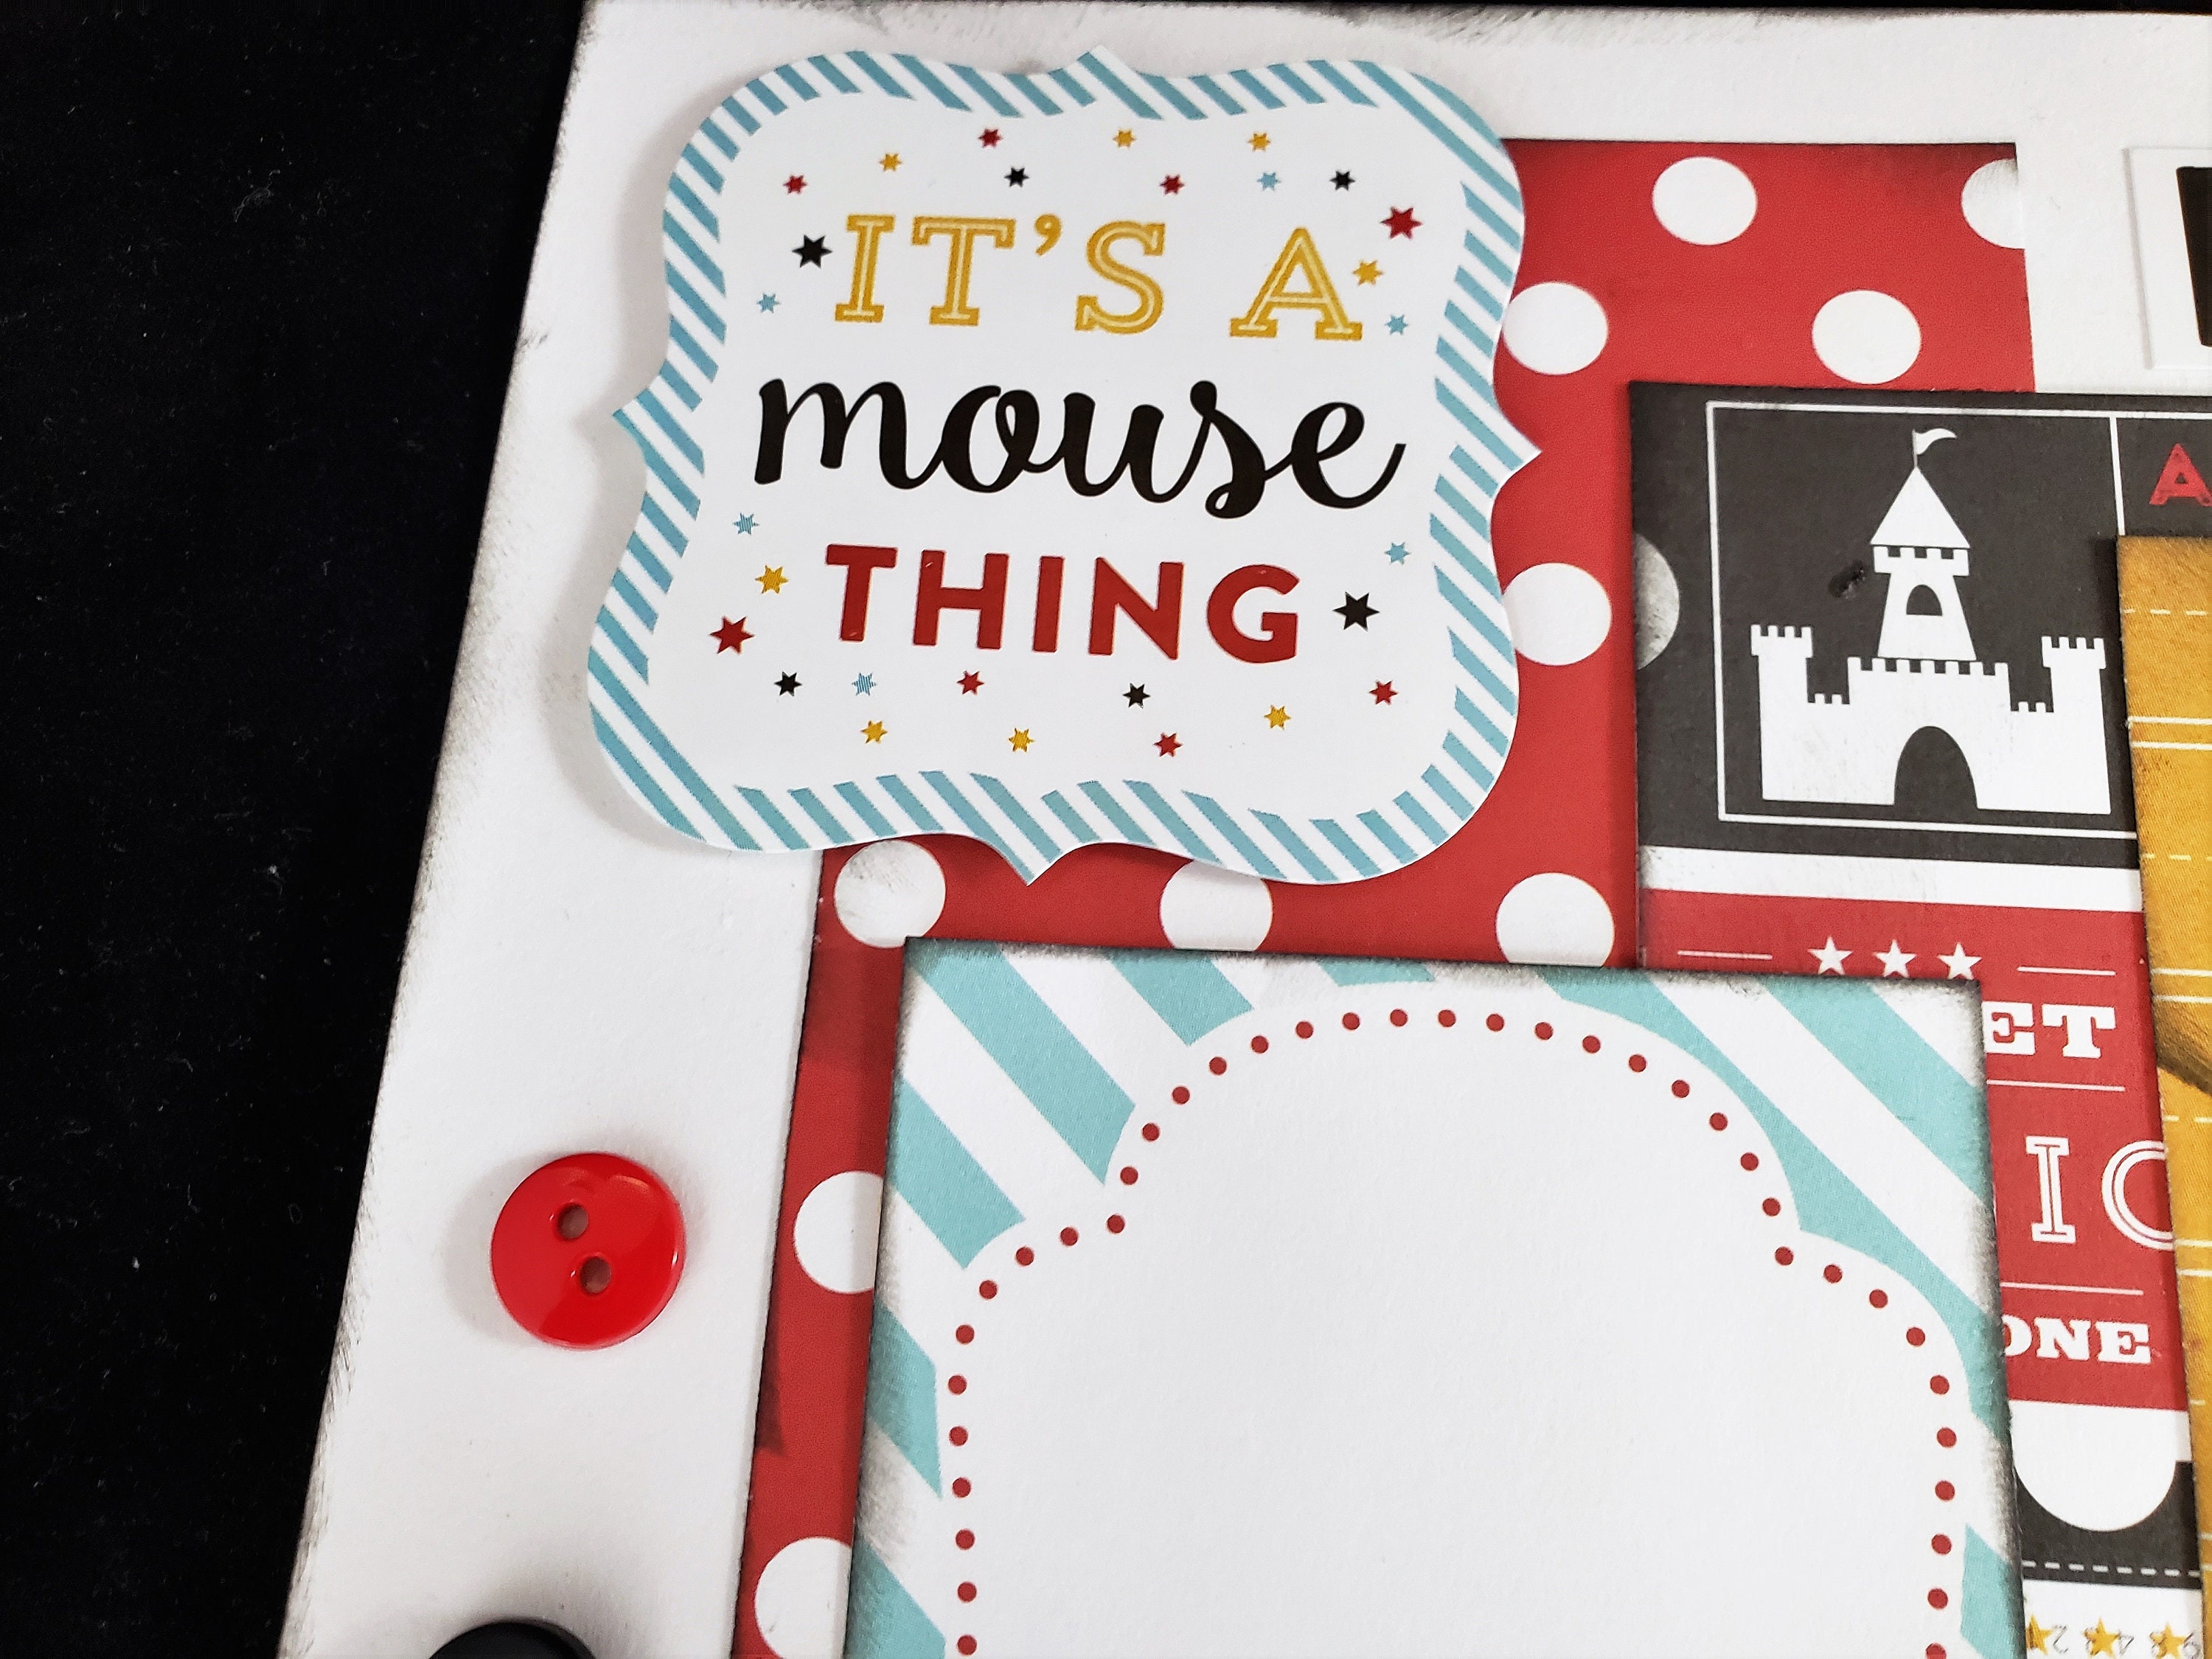 12x12 Disney Themed Scrapbook Page Instructions – Artsy Albums